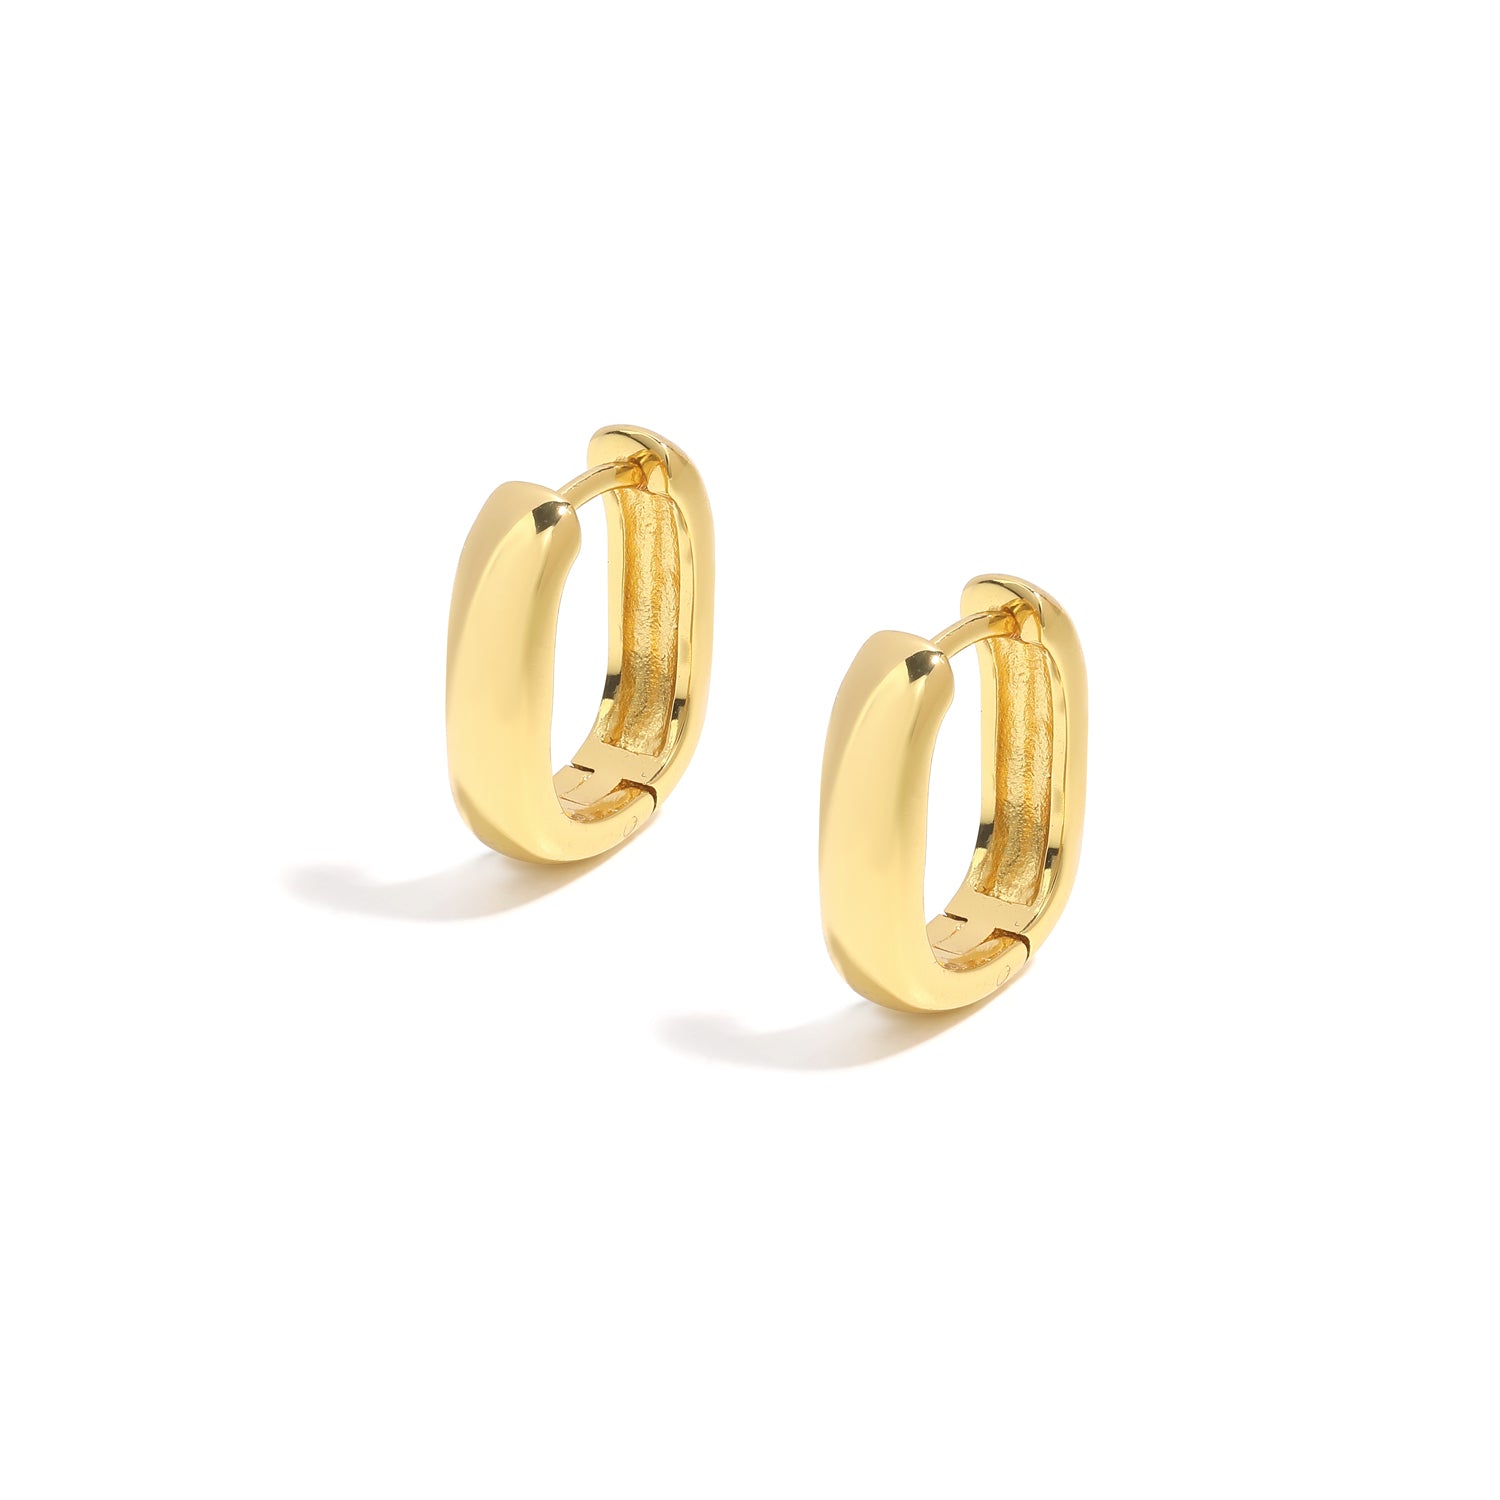 Elegant and minimalist earrings. Gold rounded huggies.